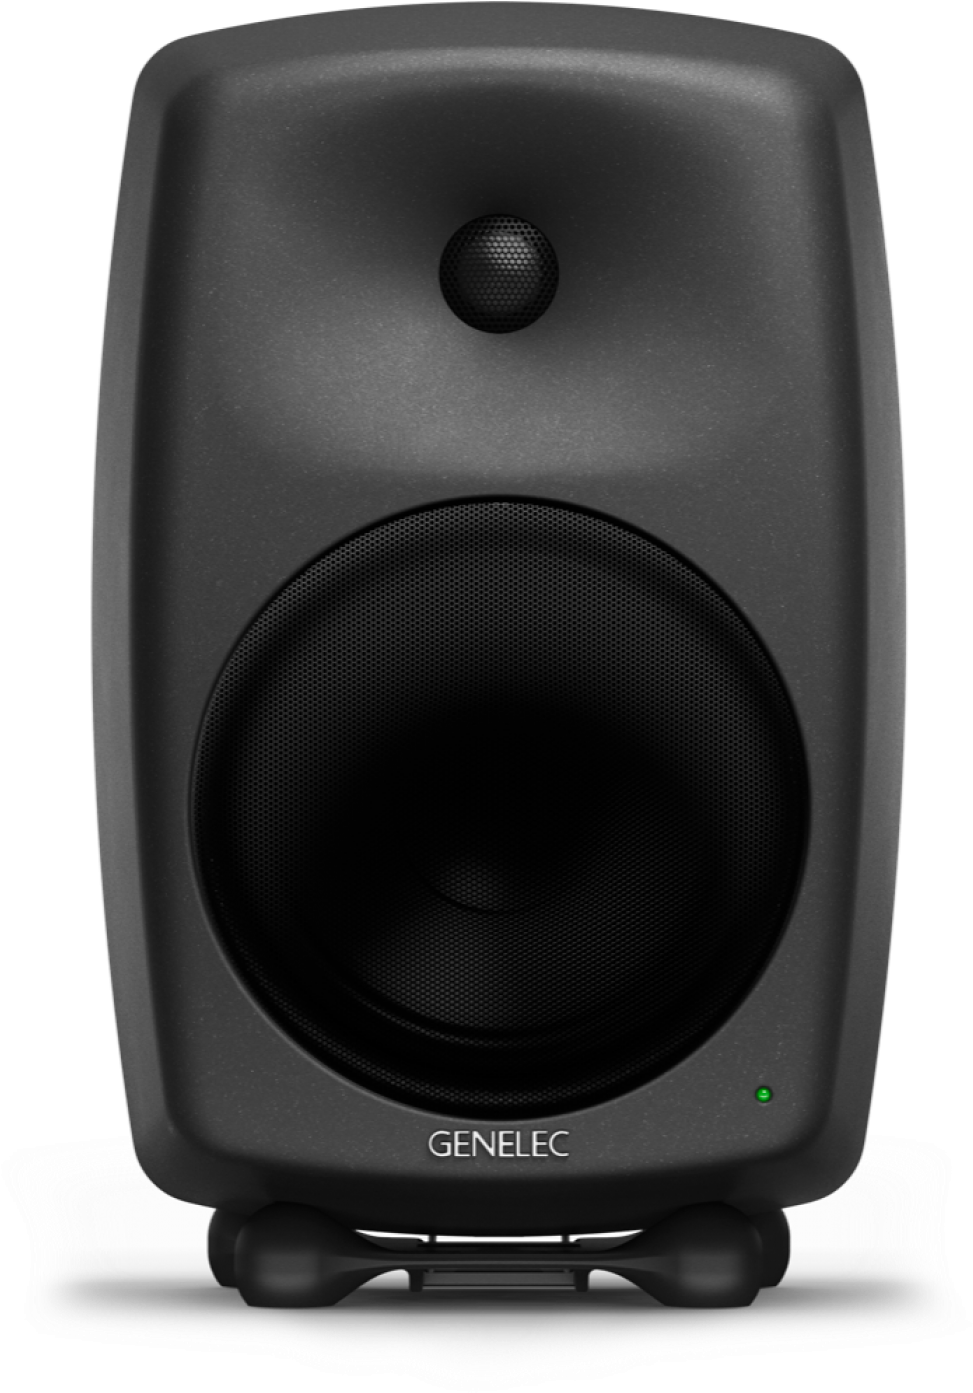 A Black Speaker With A Round Black Circle